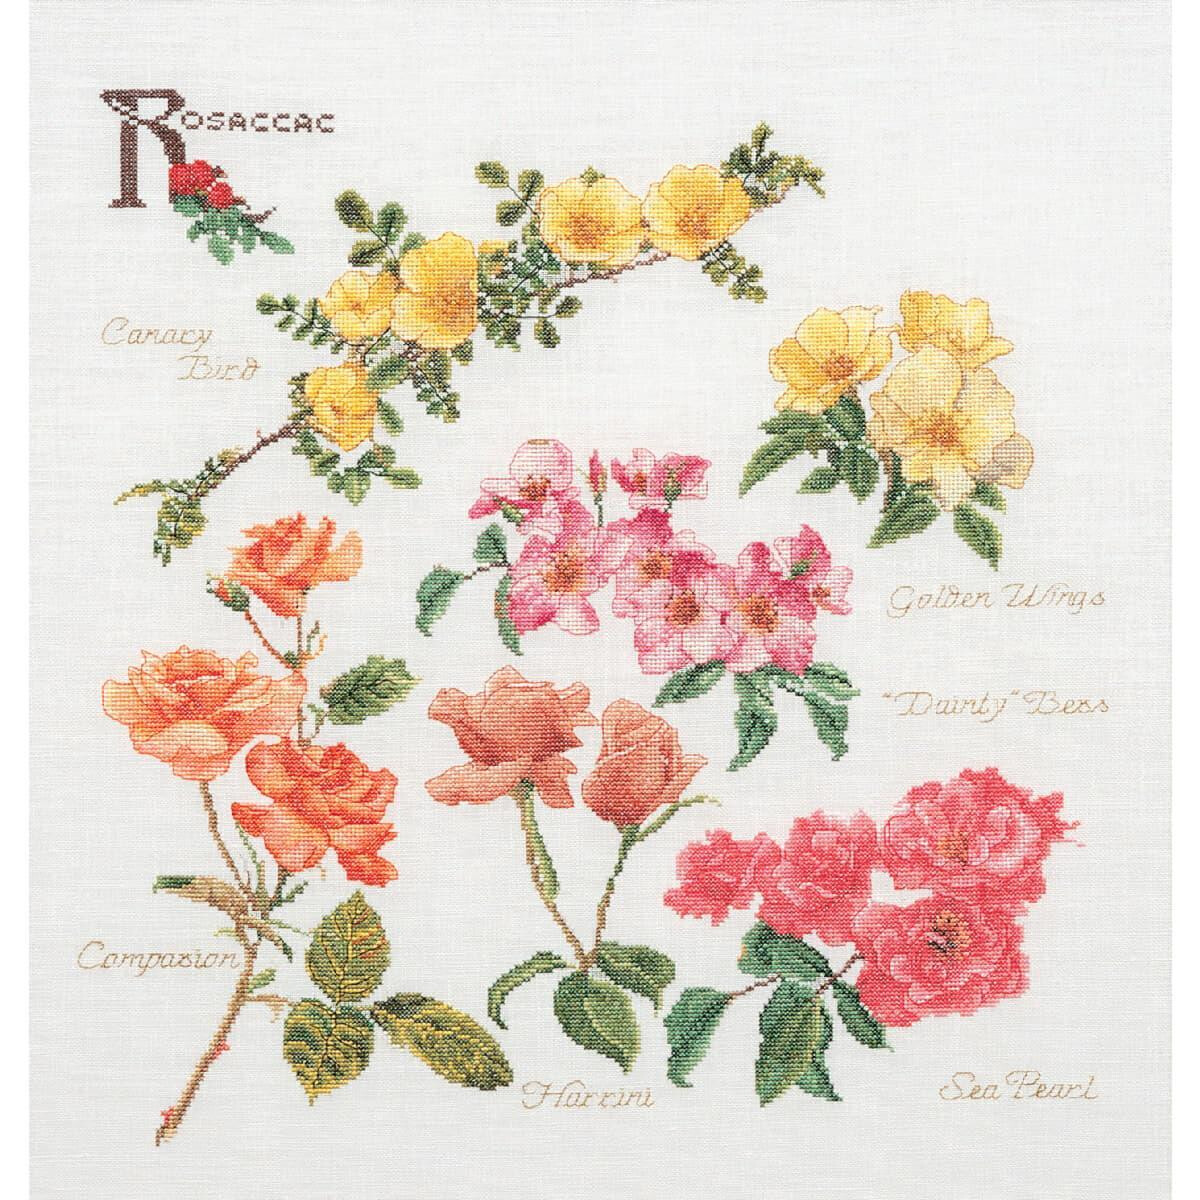 The embroidery kit you describe shows a detailed floral...